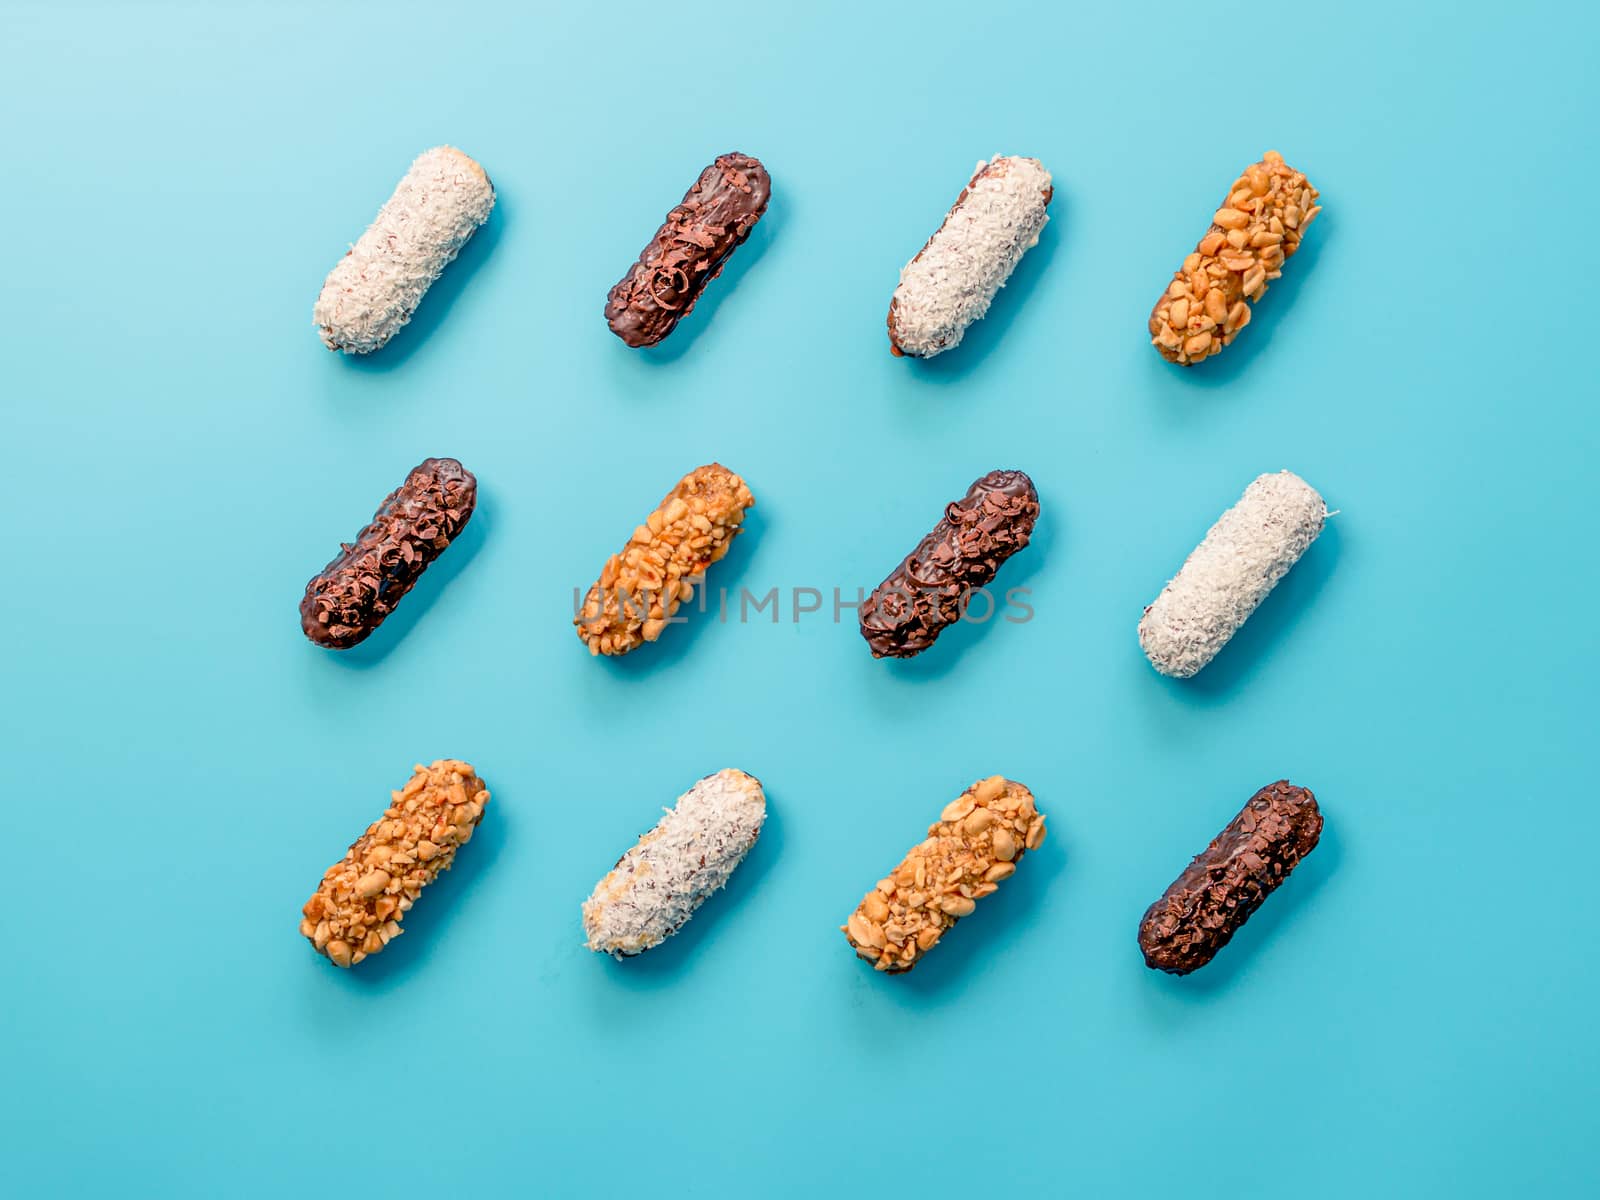 Set of different homemade eclairs on blue background. Top view of delicious healthy profitroles with different decor elements - chocolate, peanut and sherdded coconut